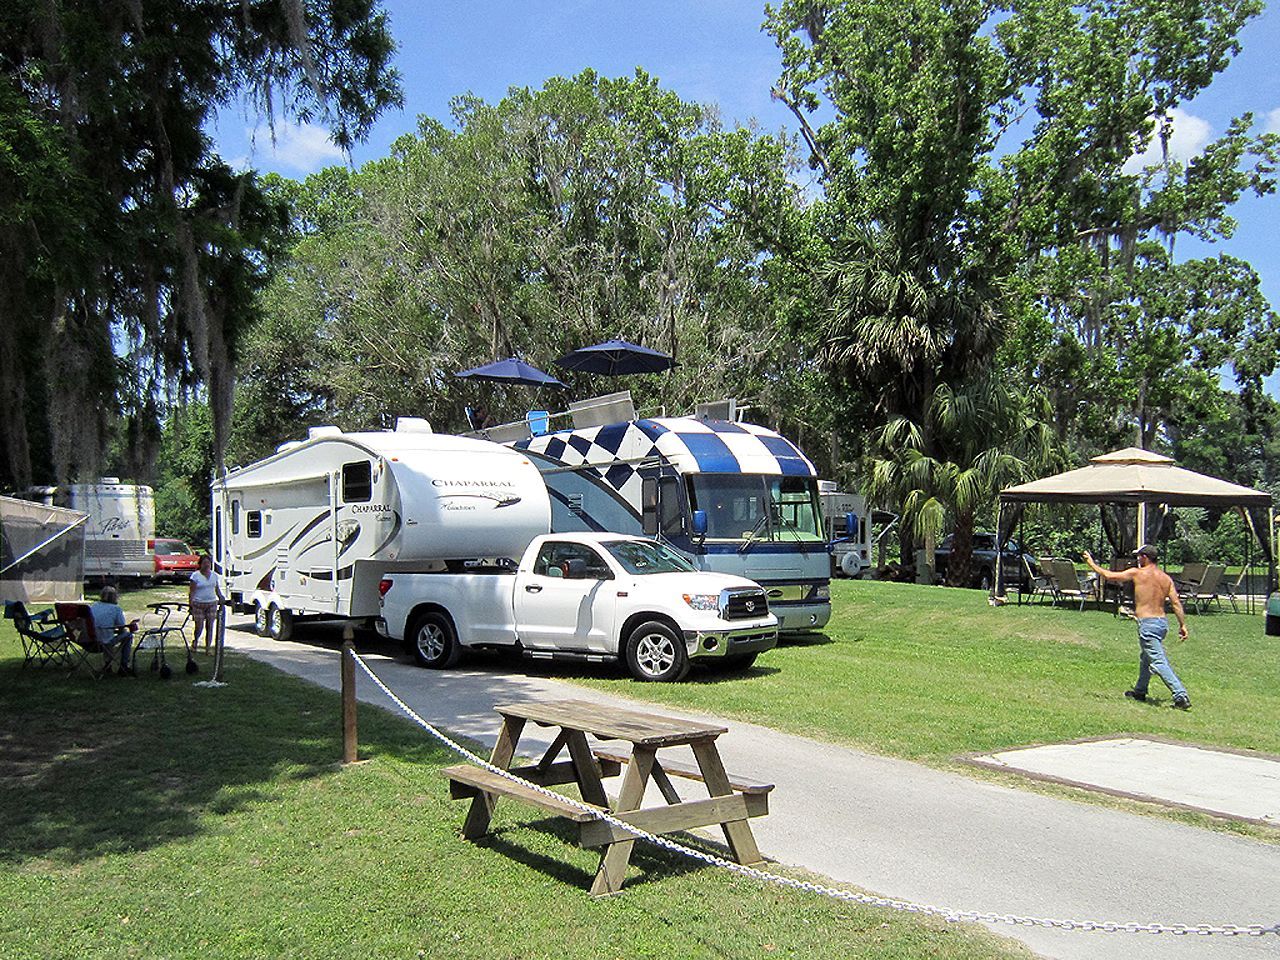 a group of rvs are parked in a grassy area next to a picnic table .